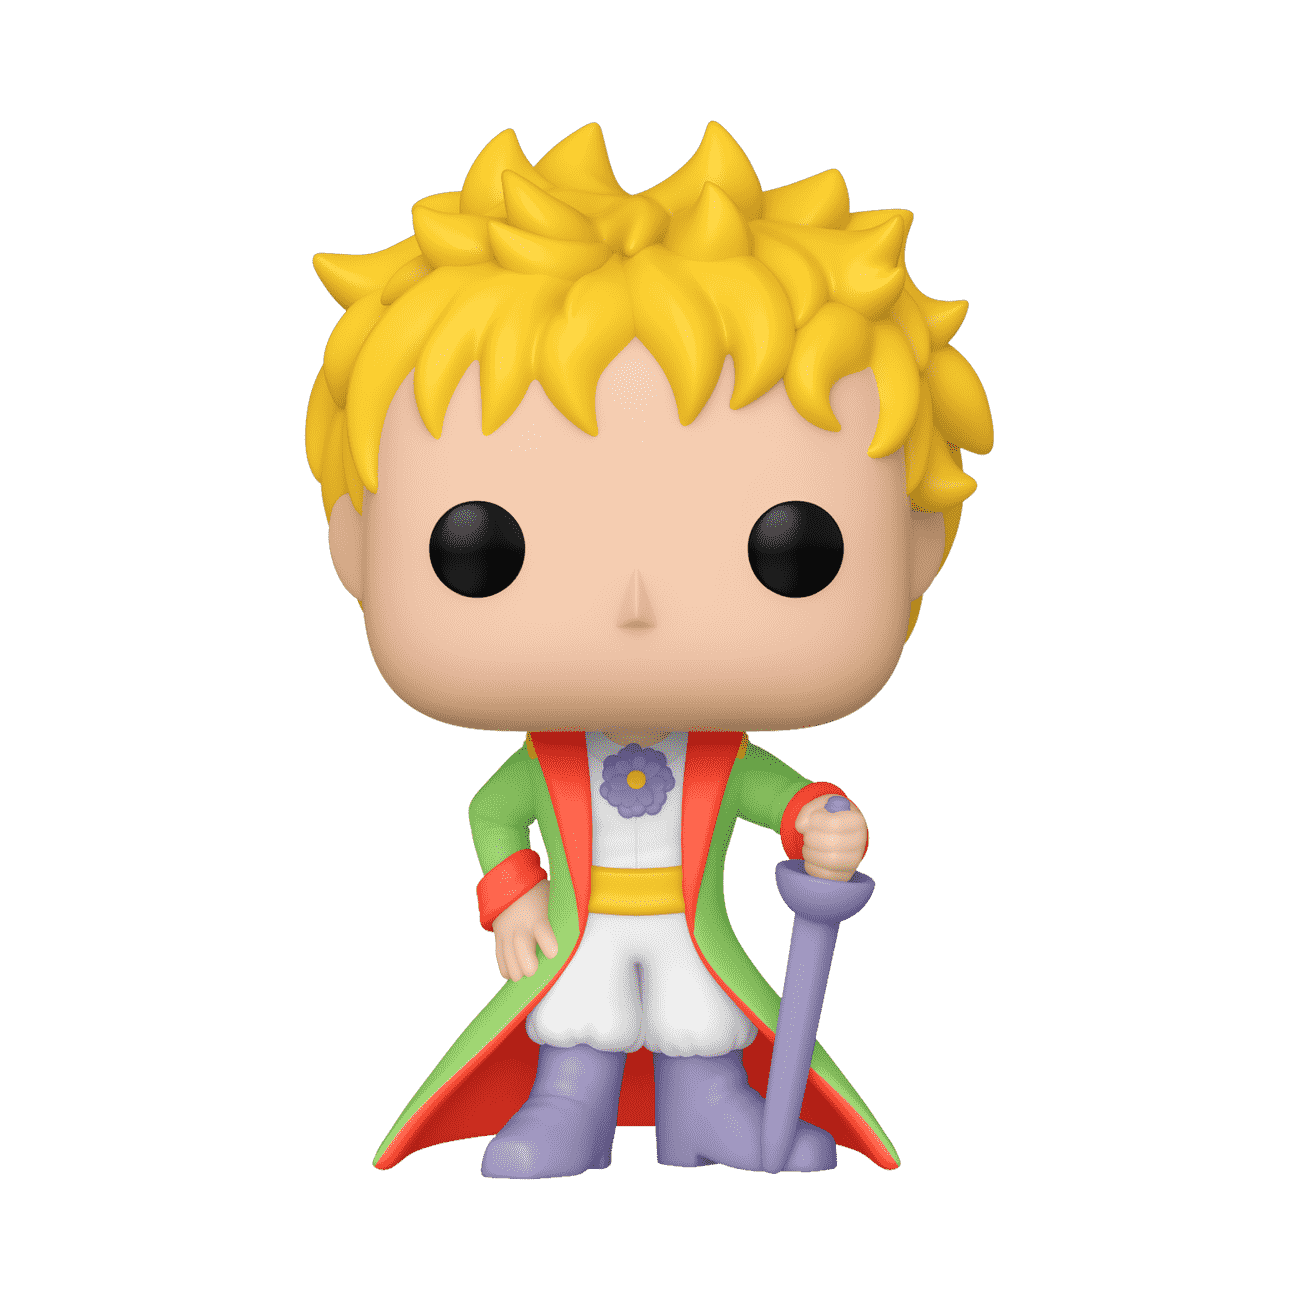 Buy Pop! The Little Prince at Funko.